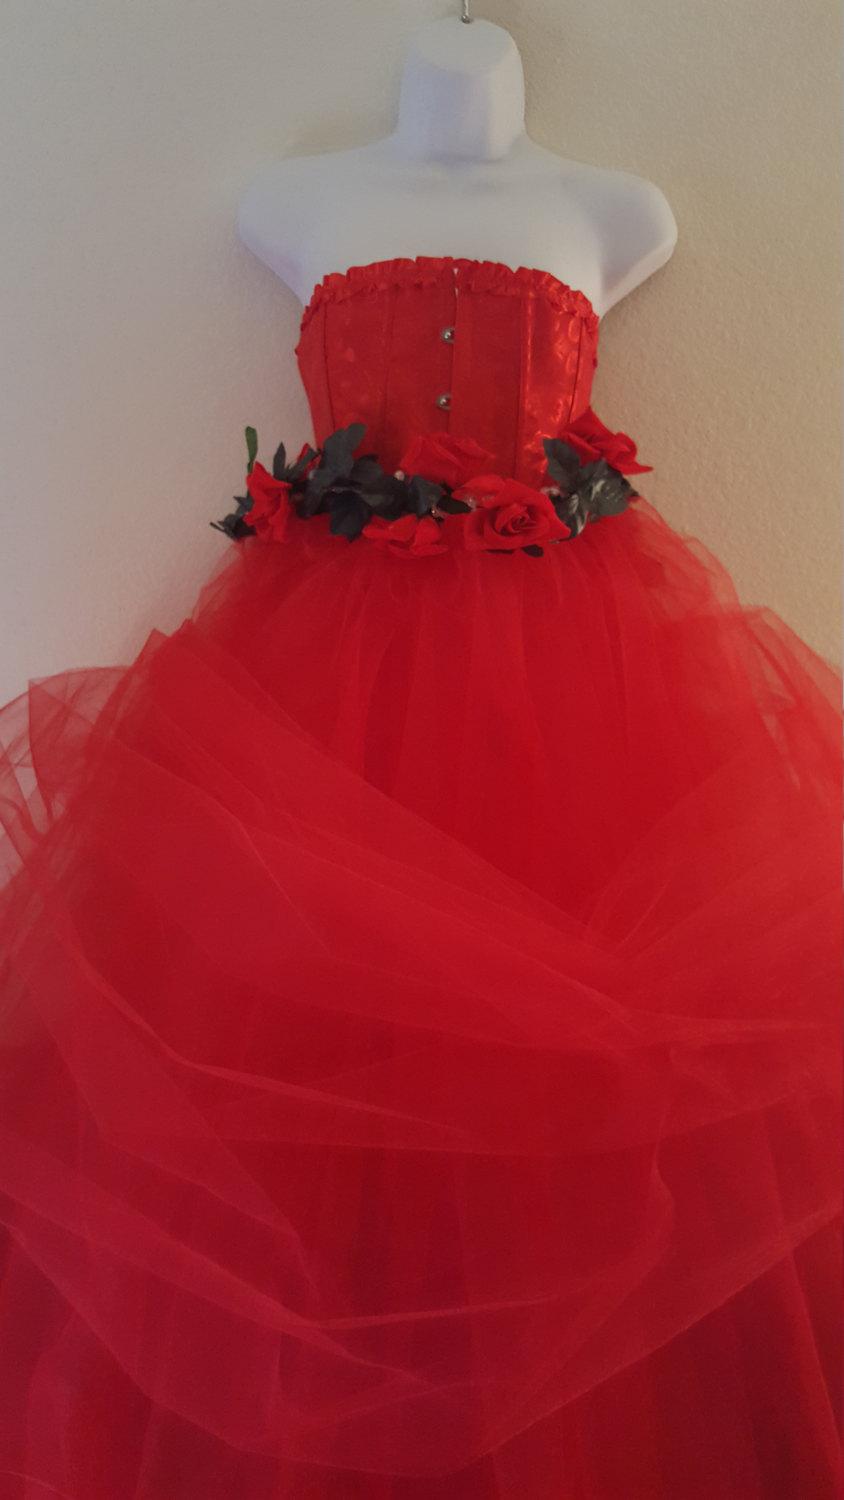 Mariage - Sample Gown Listing / Valentine Rose Goddess Romantic Red Corset Tulle Ball Gown Dress Bridal Wedding Gown Party Costume